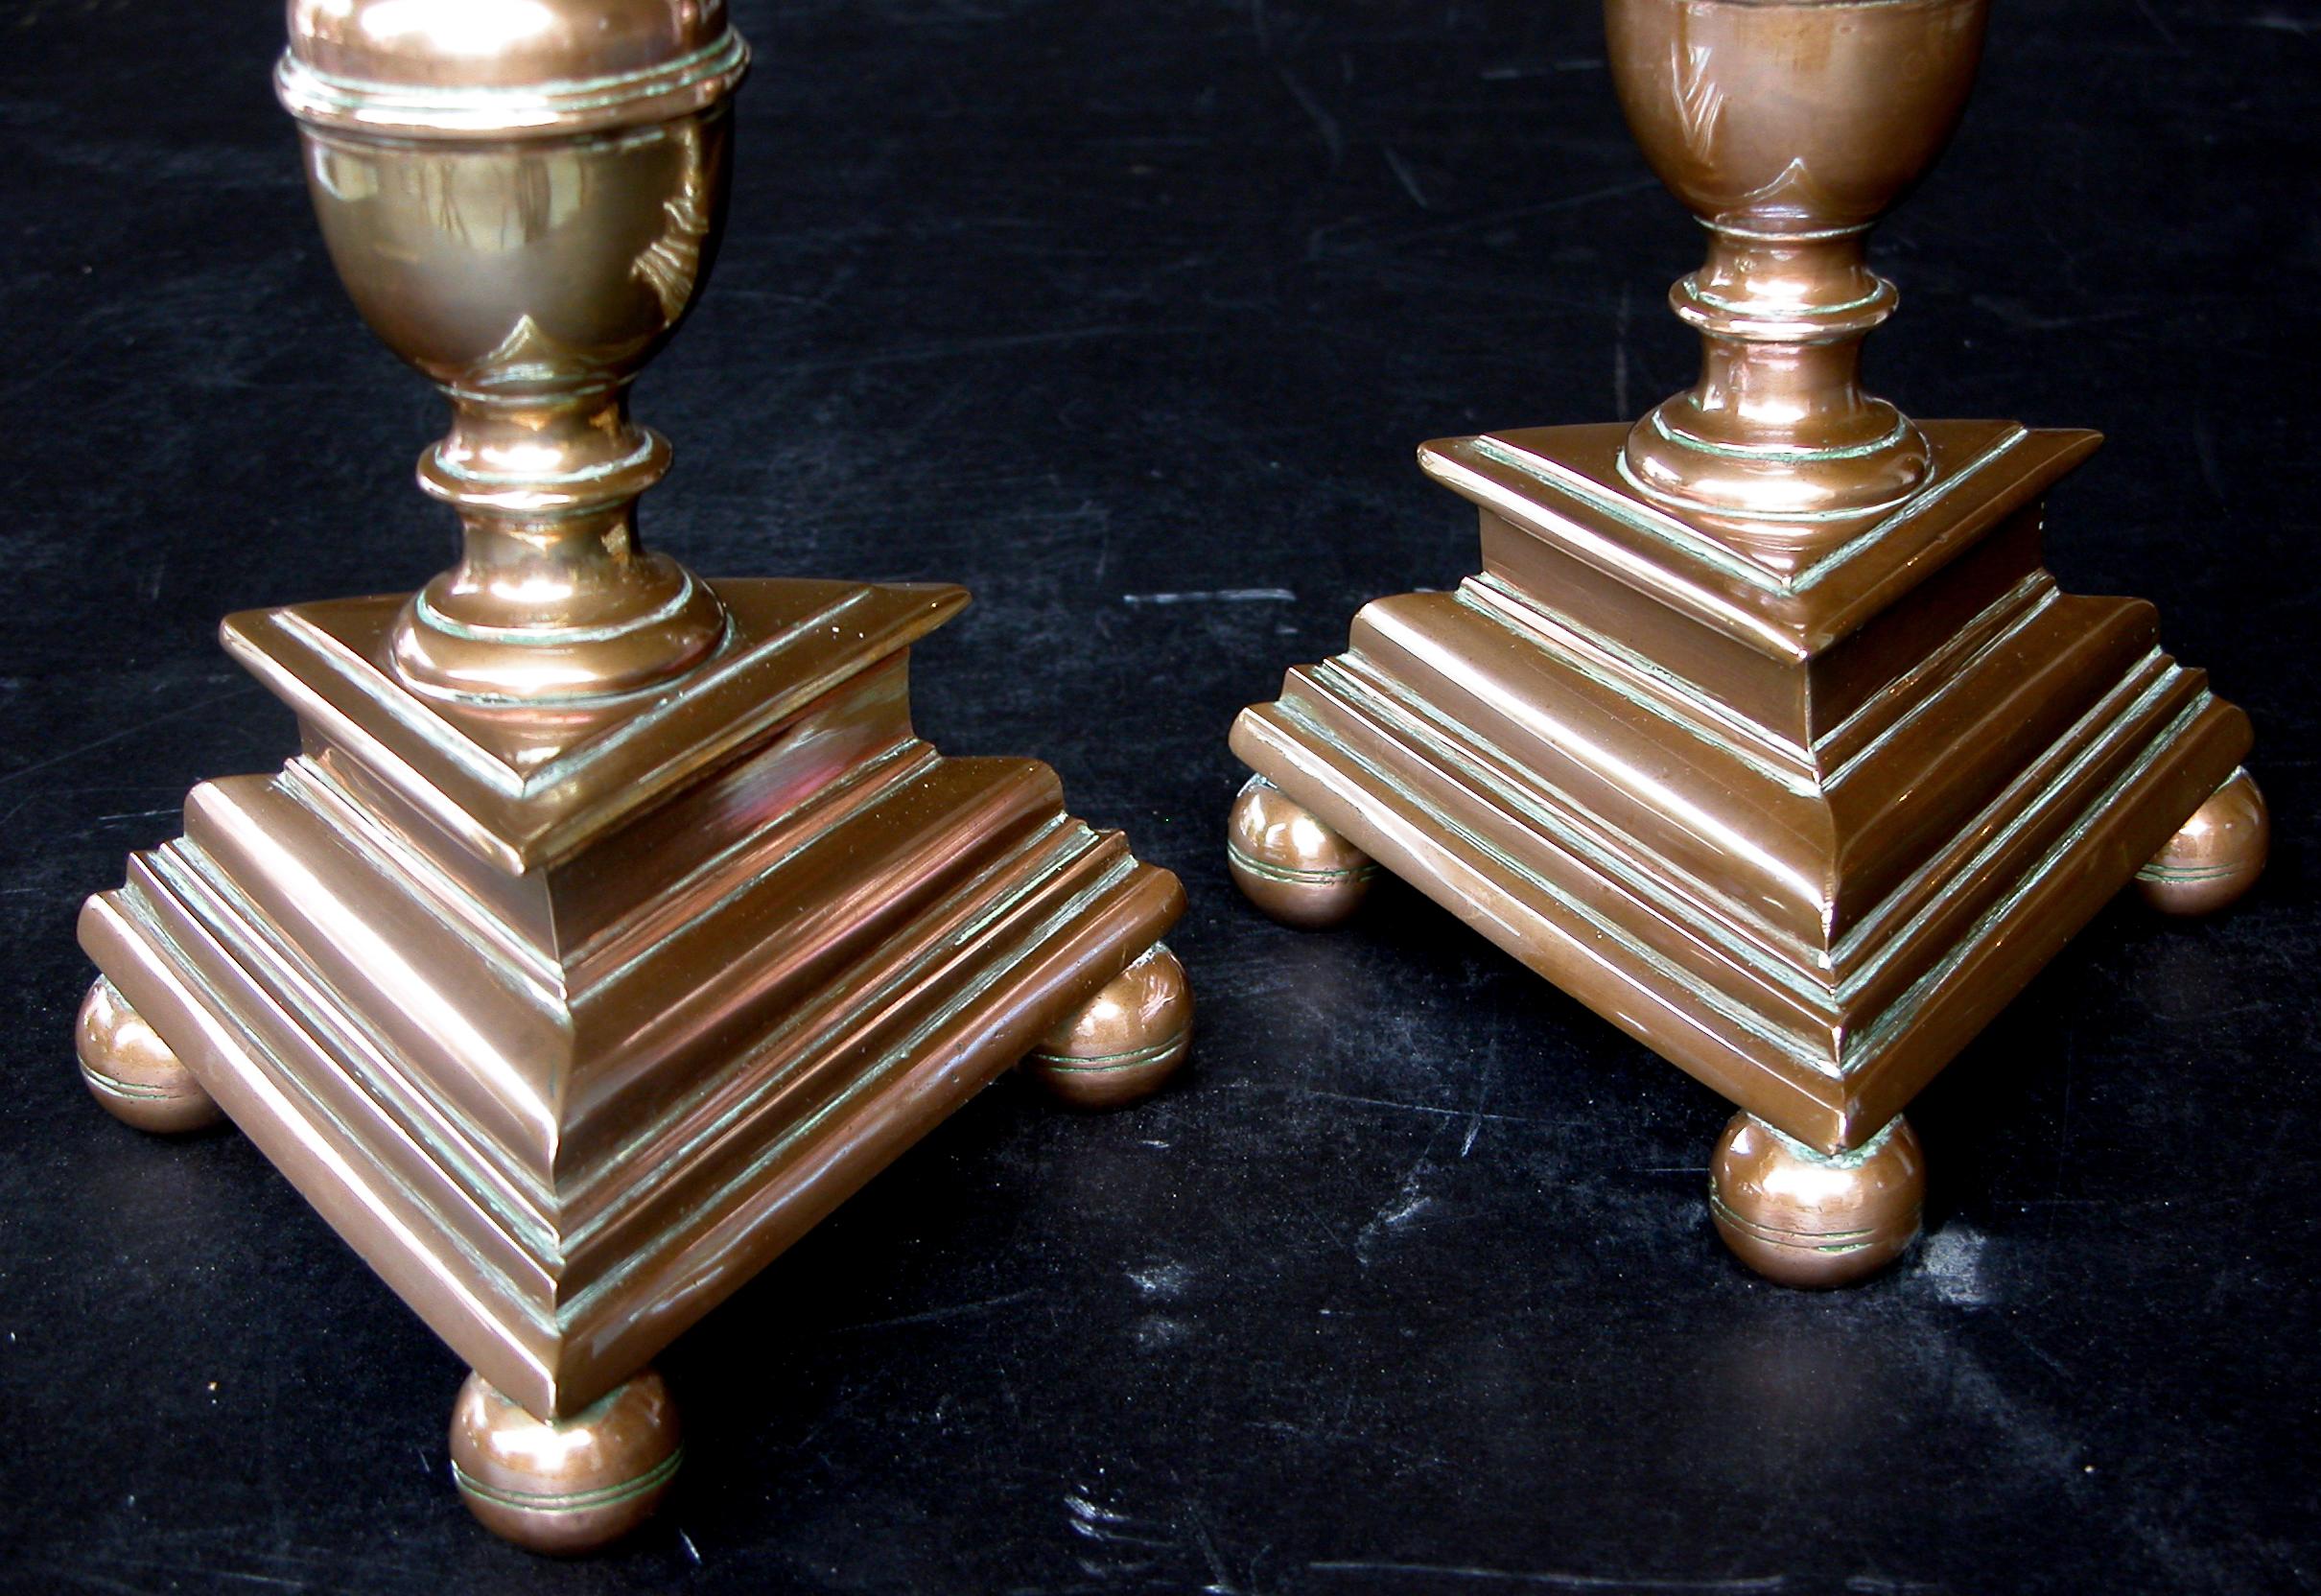 Each robust stick with deep cup above a double-baluster support; raised on a tripartite base with spheroid feet; height 18